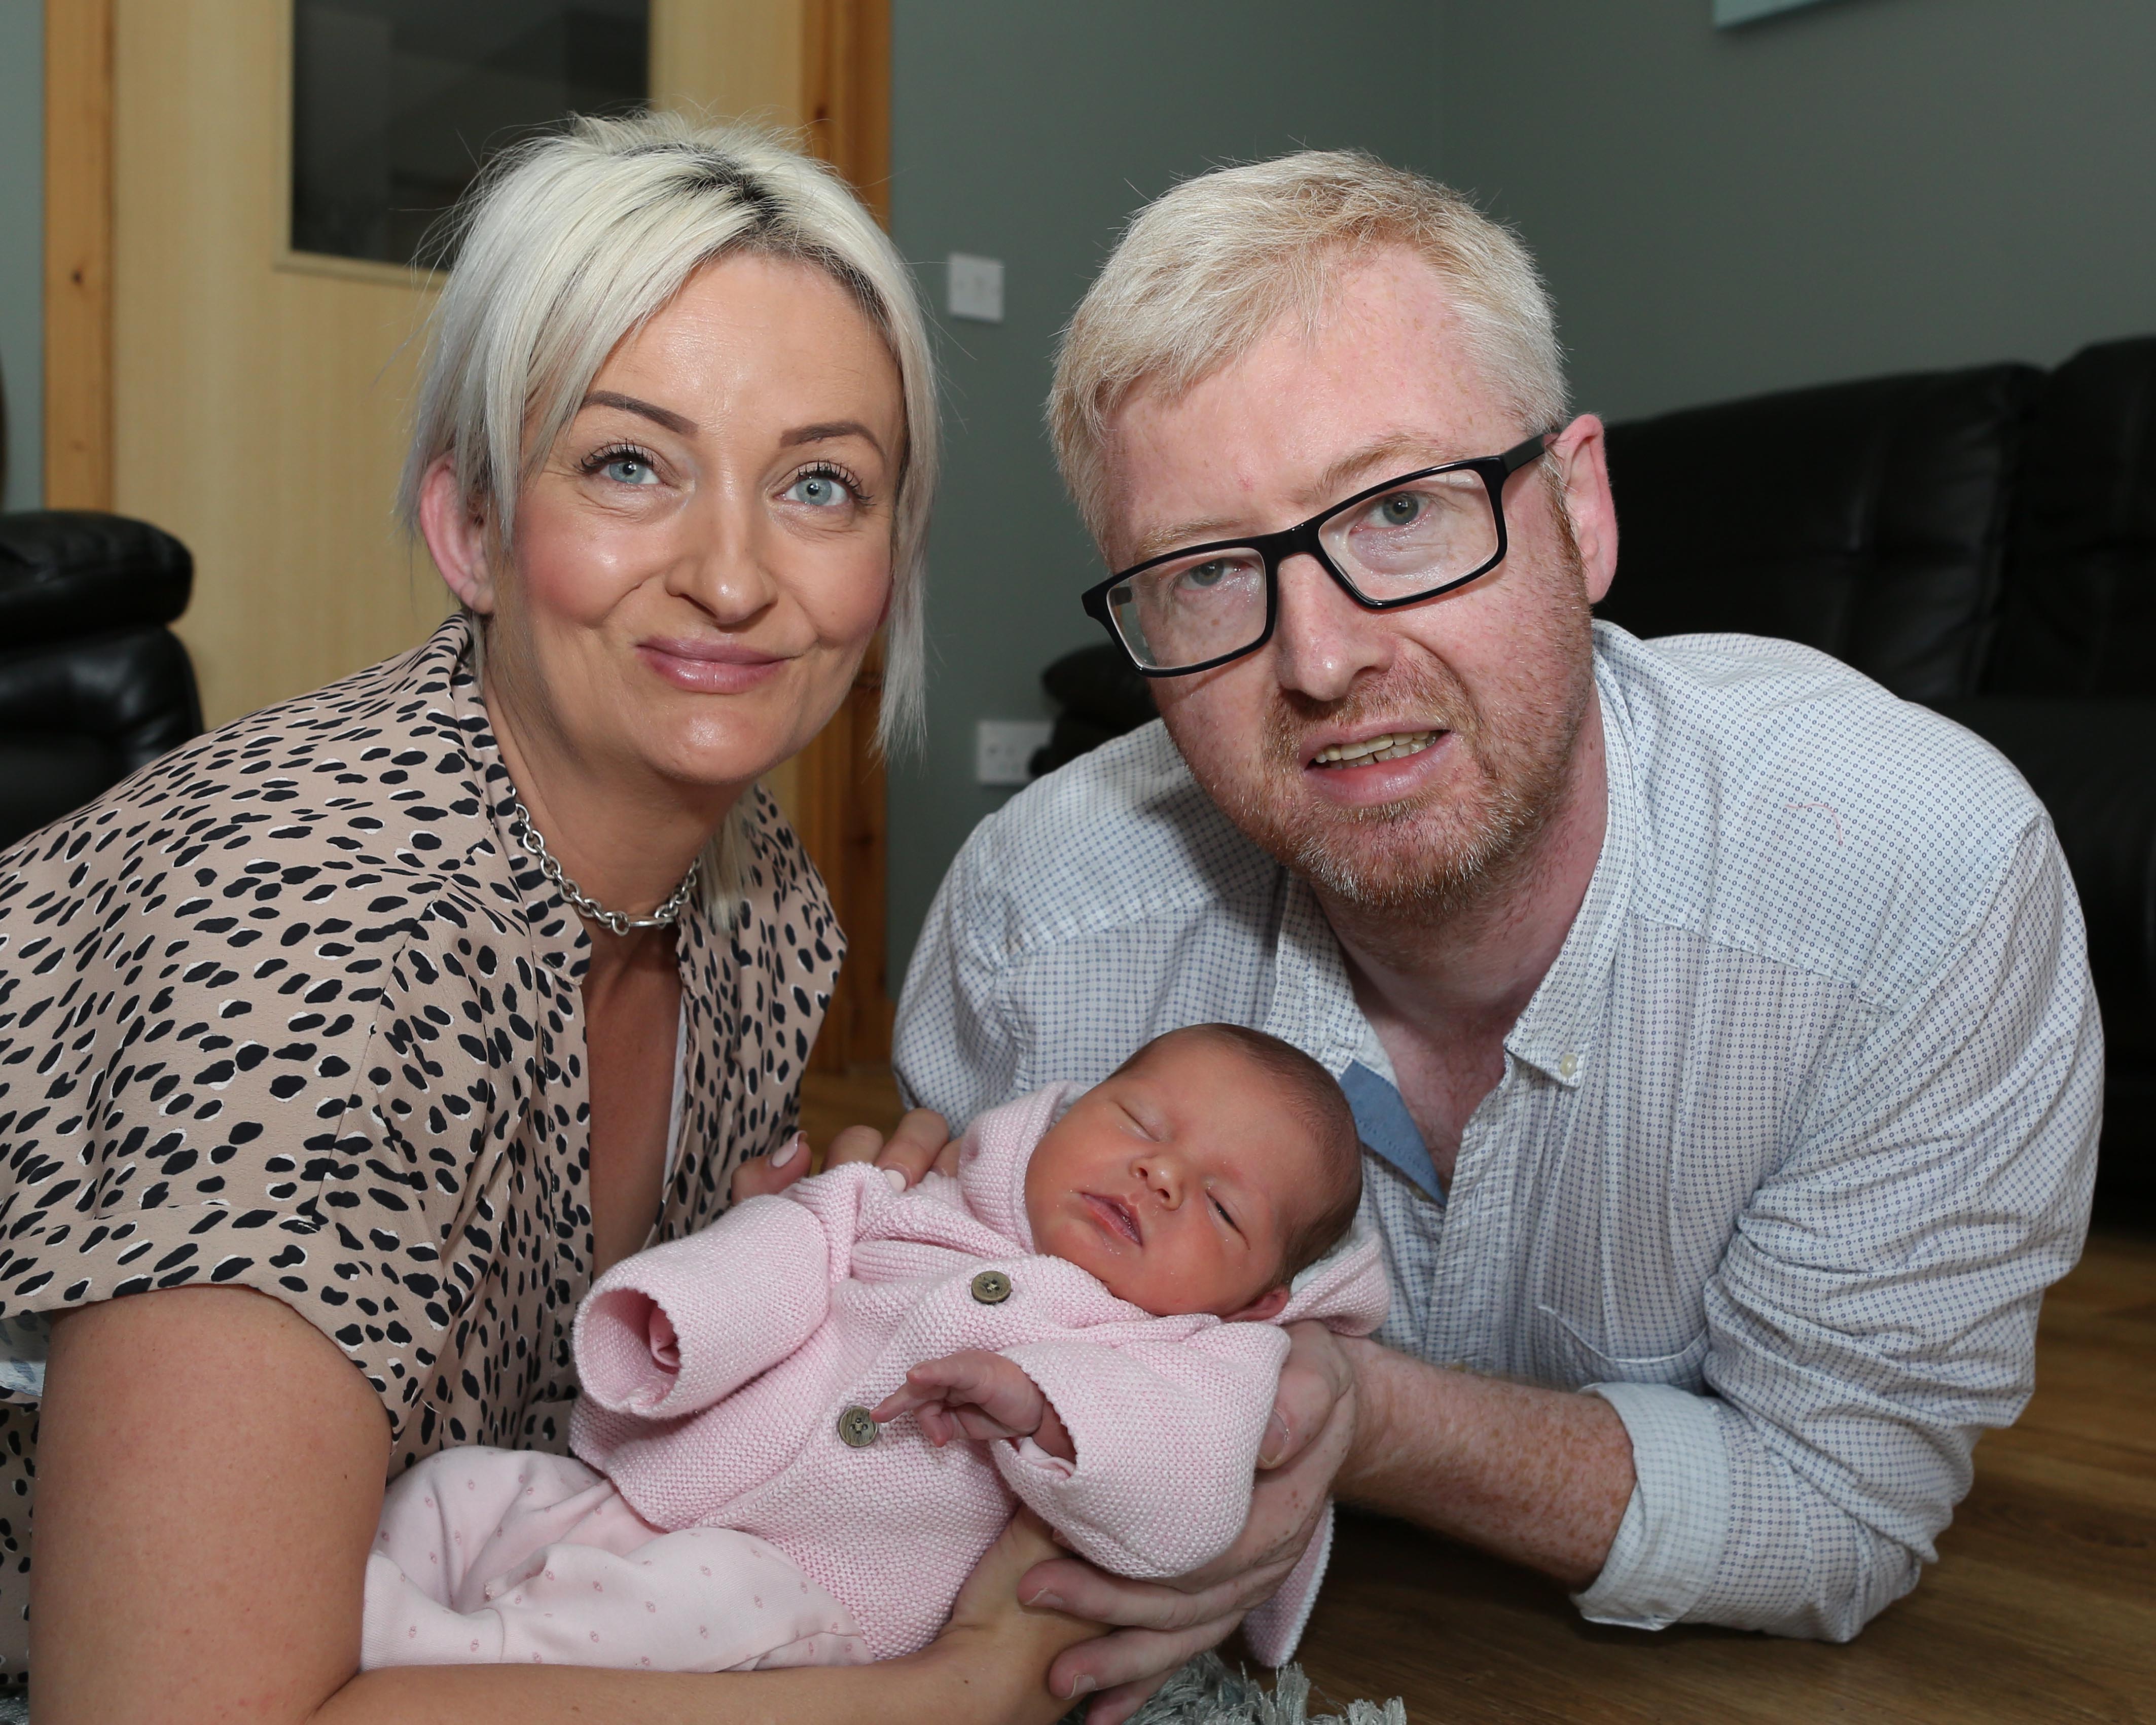 Alexis Brett, her husband Davie and baby Cameron - a girl.